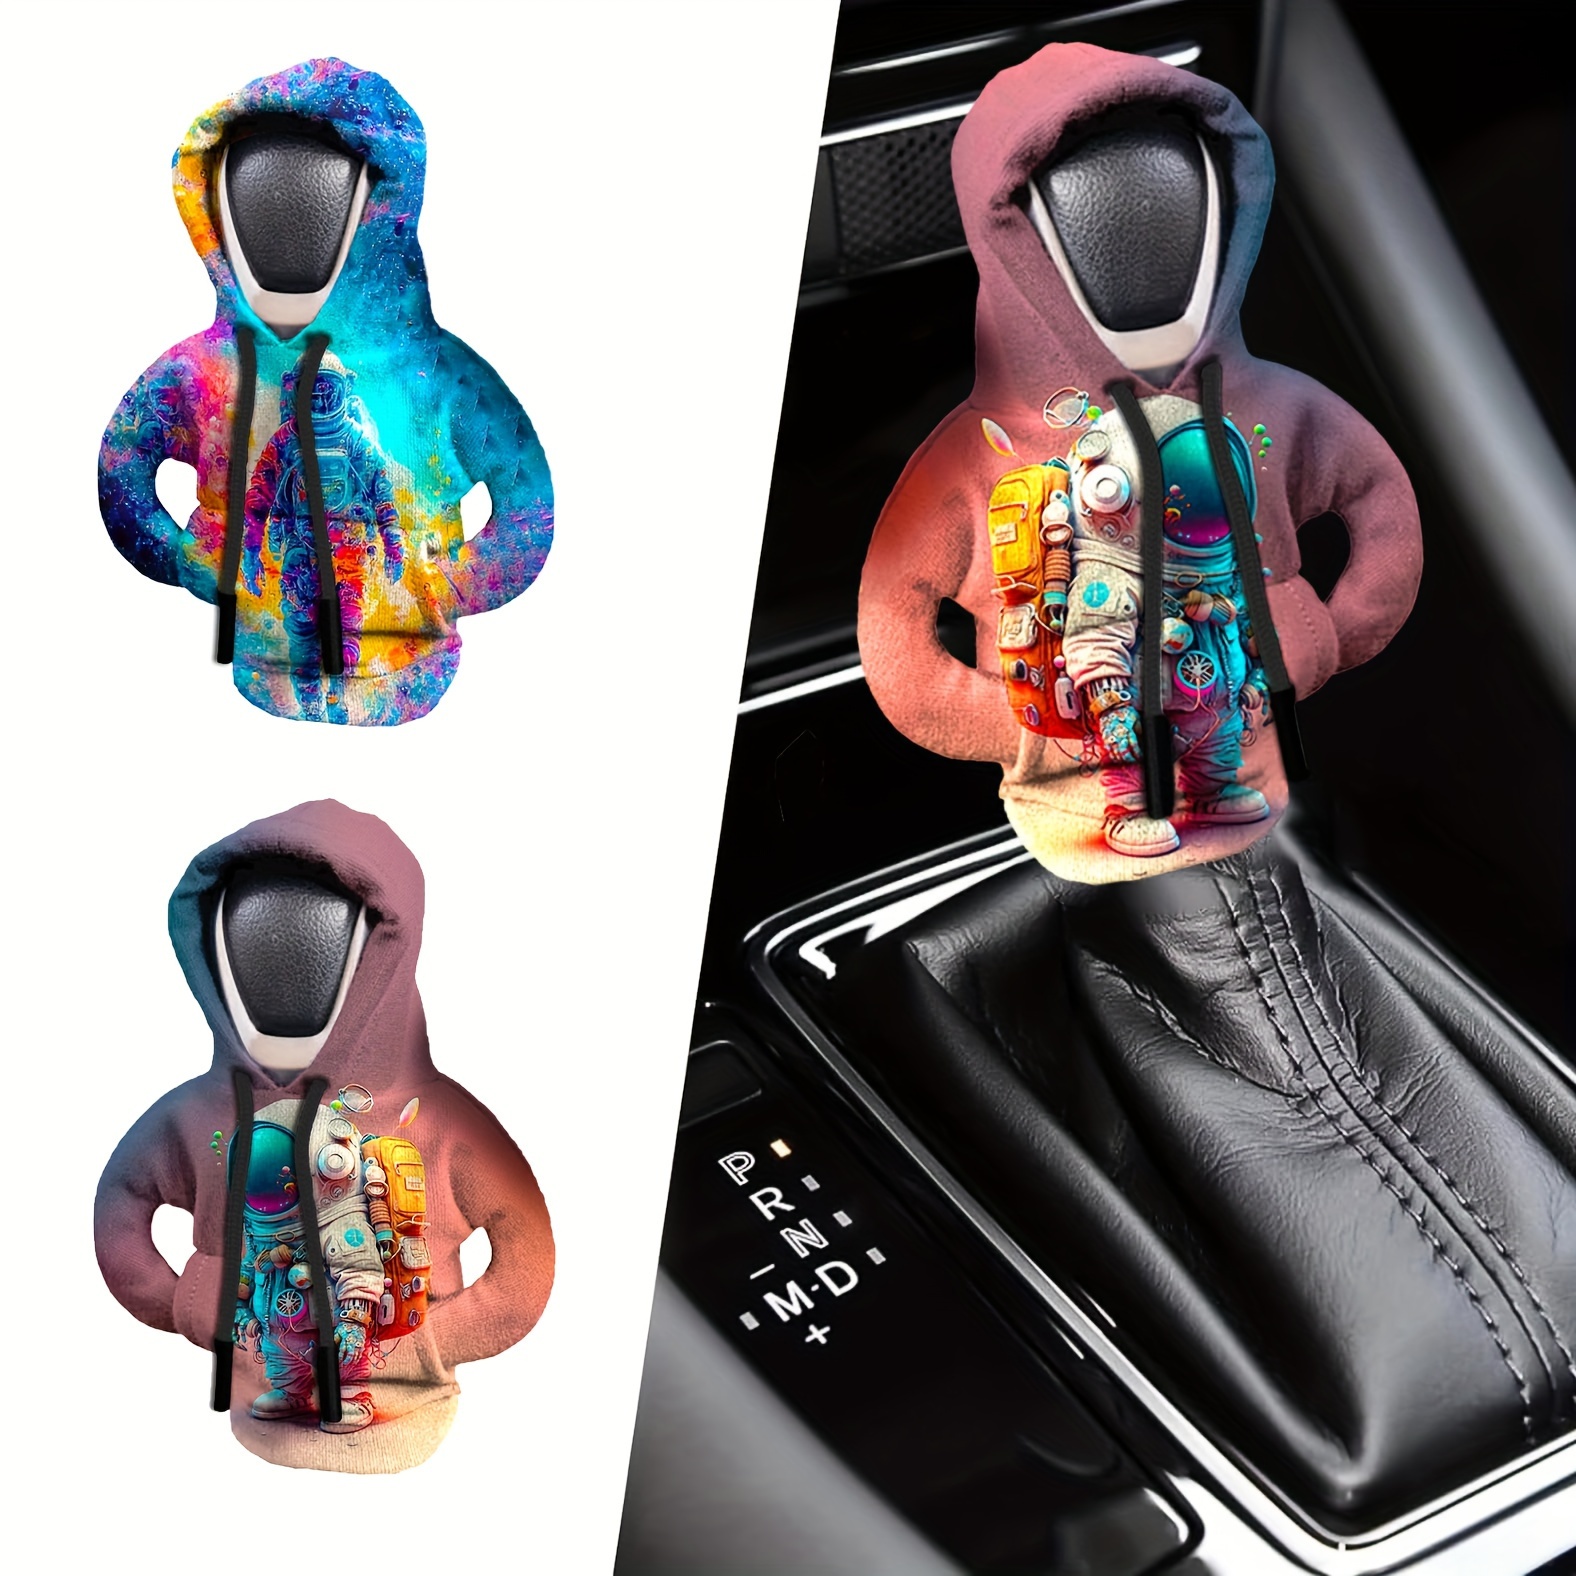 

Gear Shift Hoodie, Gear Shift Cover, Universal Car Shift Knob Hoodie, Mini Hoodie For Car Shifter, Automotive Interior Cute Gadgets, Car Accessories And Decorations